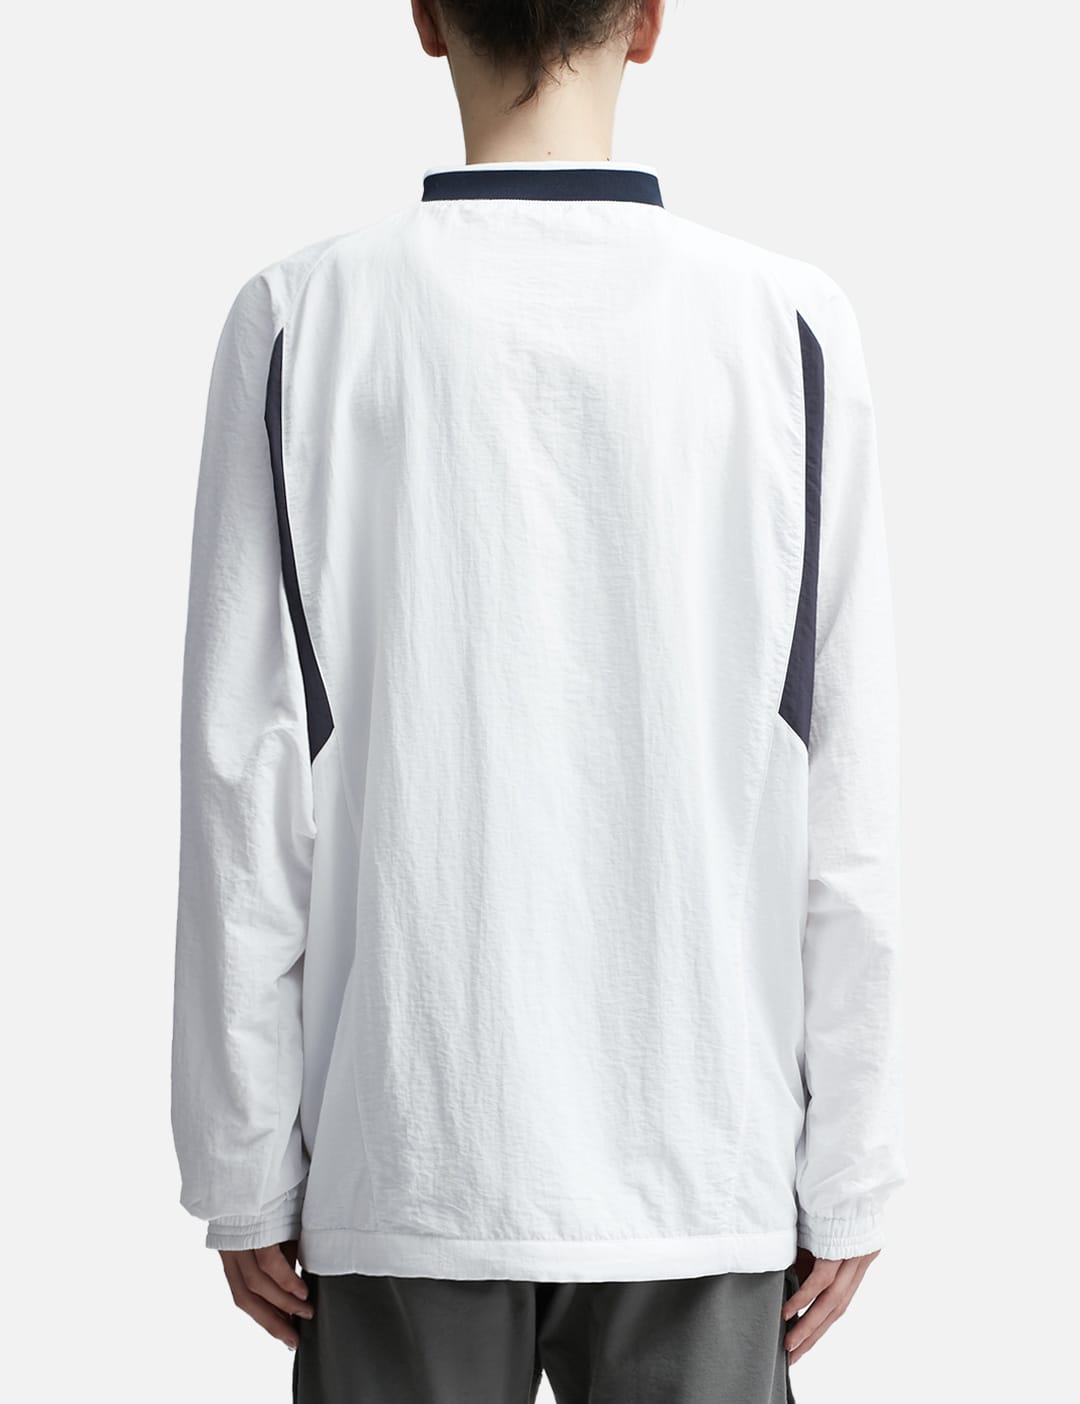 Martine Rose - Sports Pullover | HBX - Globally Curated Fashion 